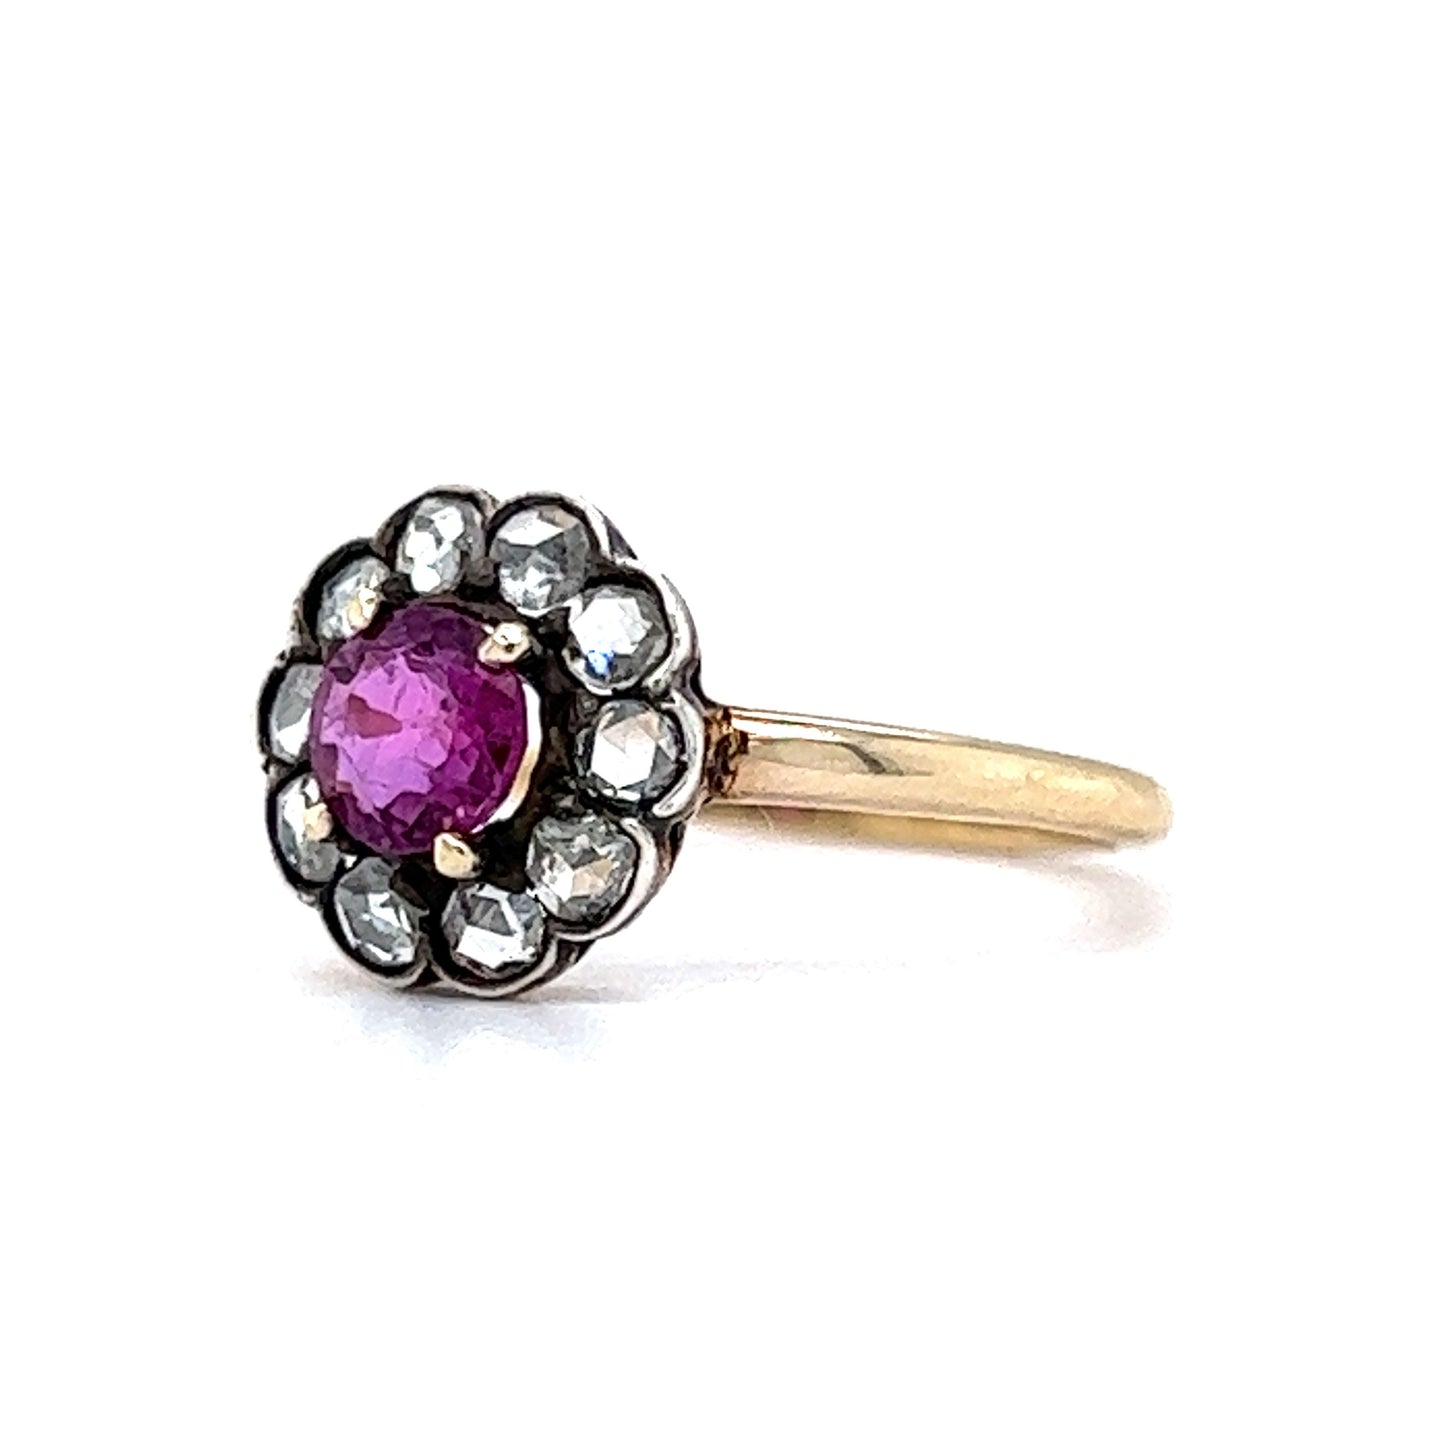 Victorian .55 Pink Sapphire & Diamond Engagement Ring in 14k & Silver